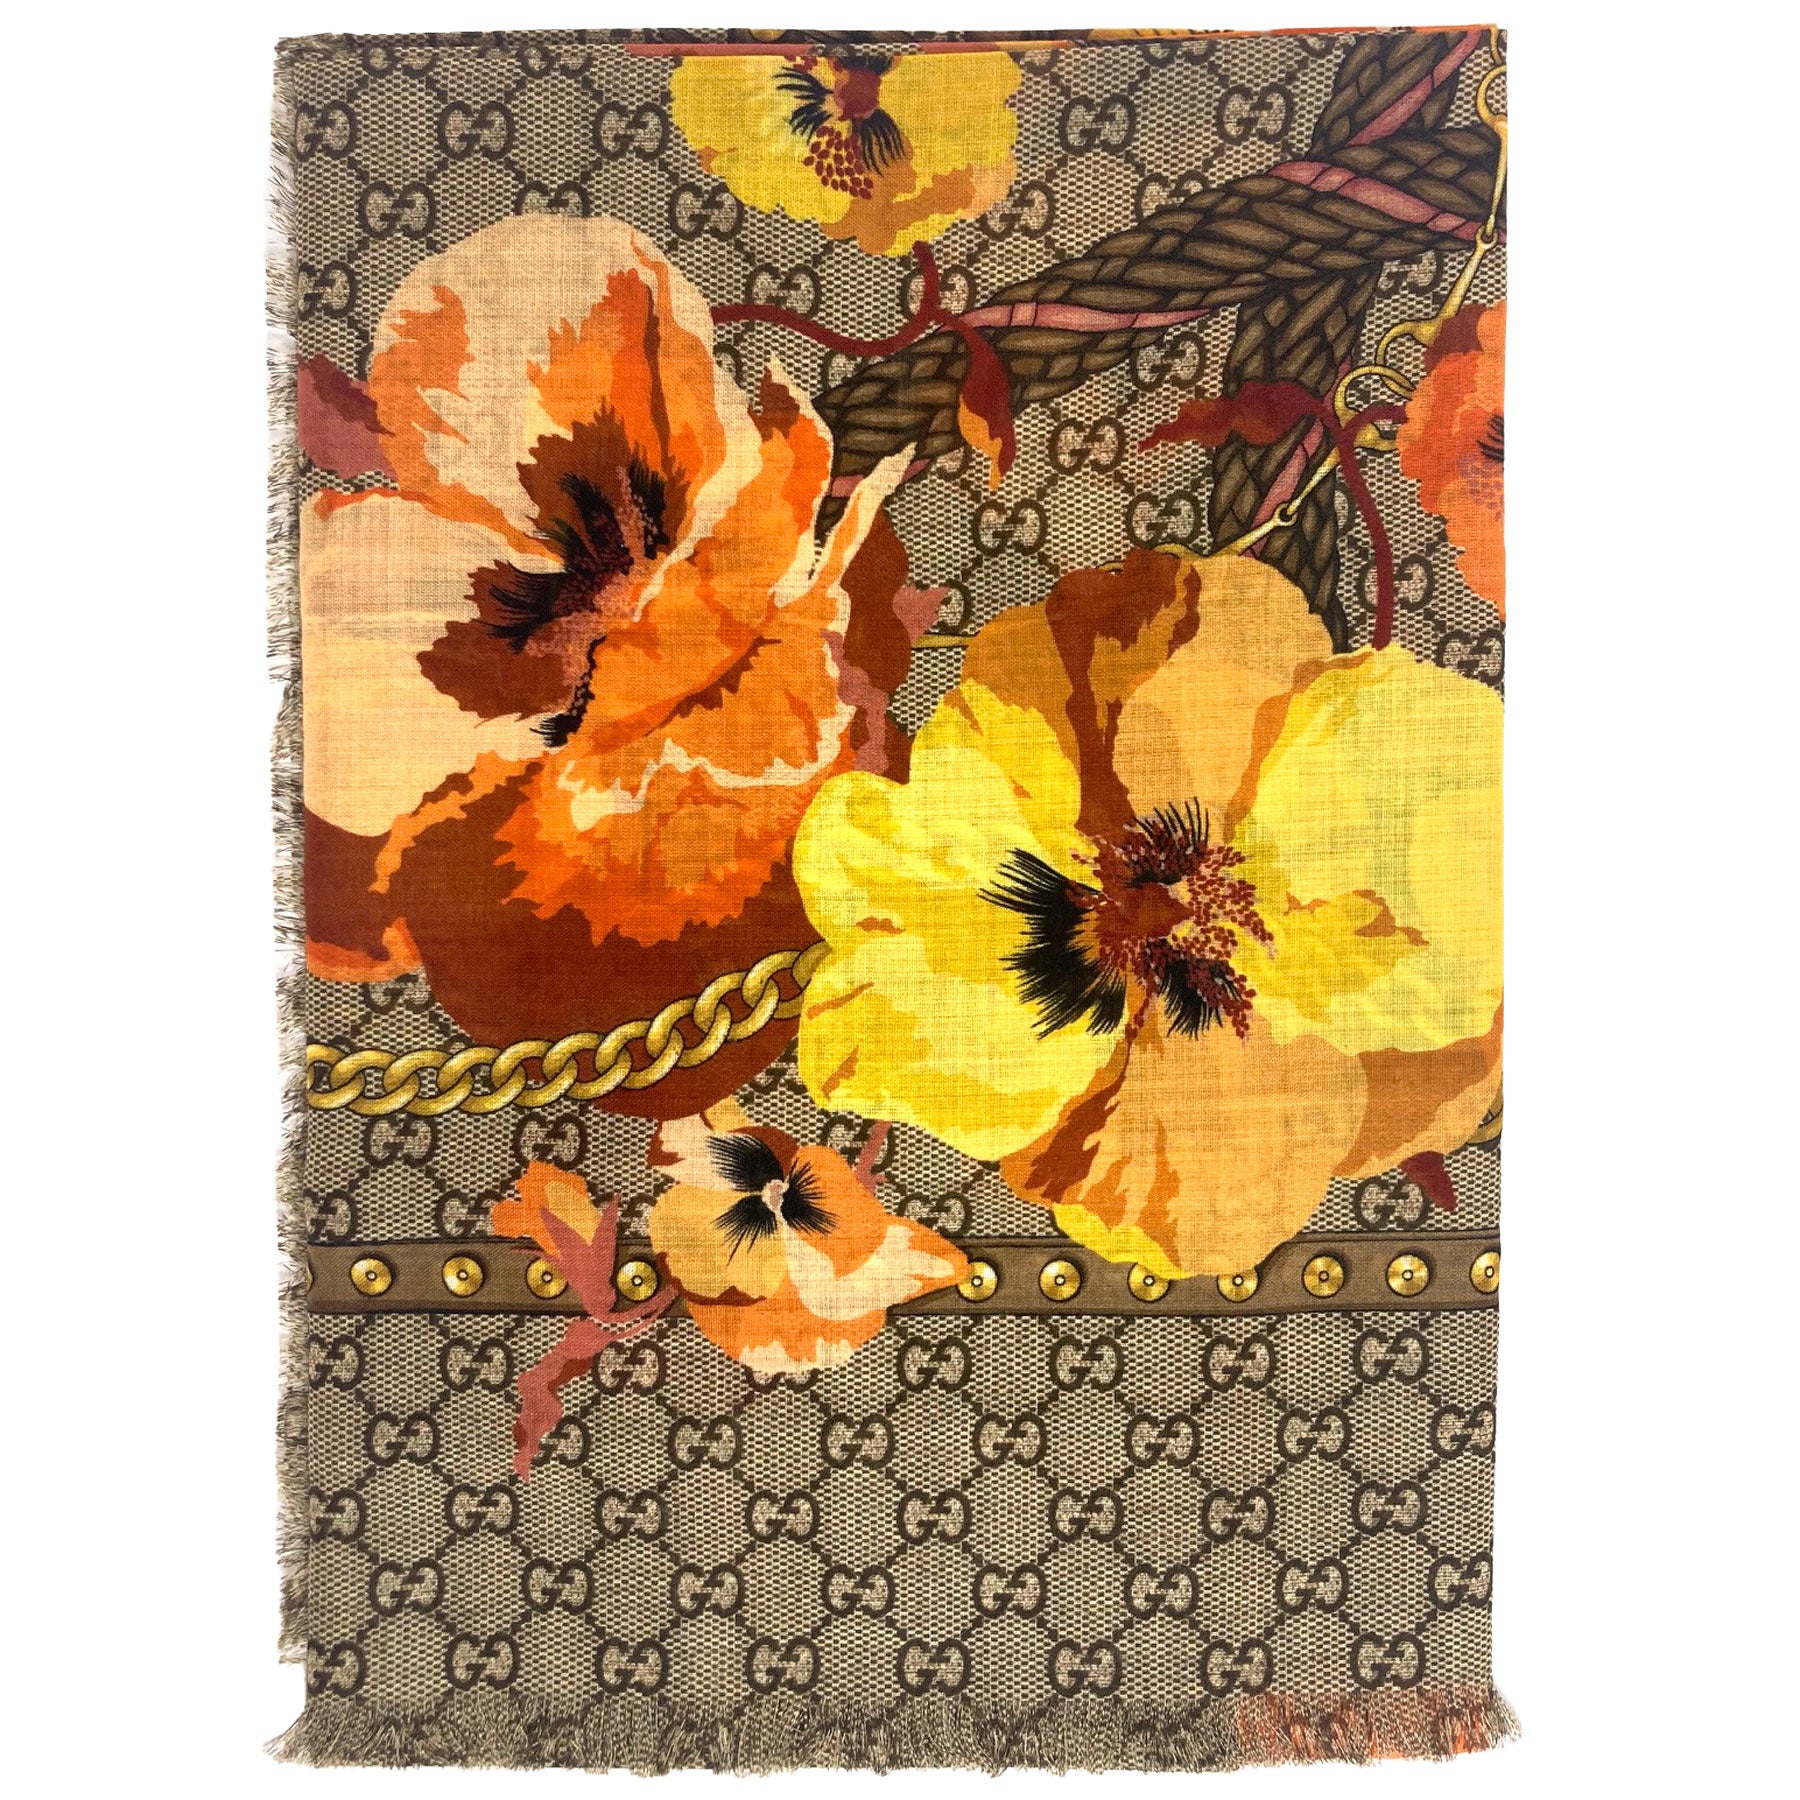 LOUIS VUITTON PARIS SILKY SCARF/SHAWL. BROWN WITH PINK FLORAL